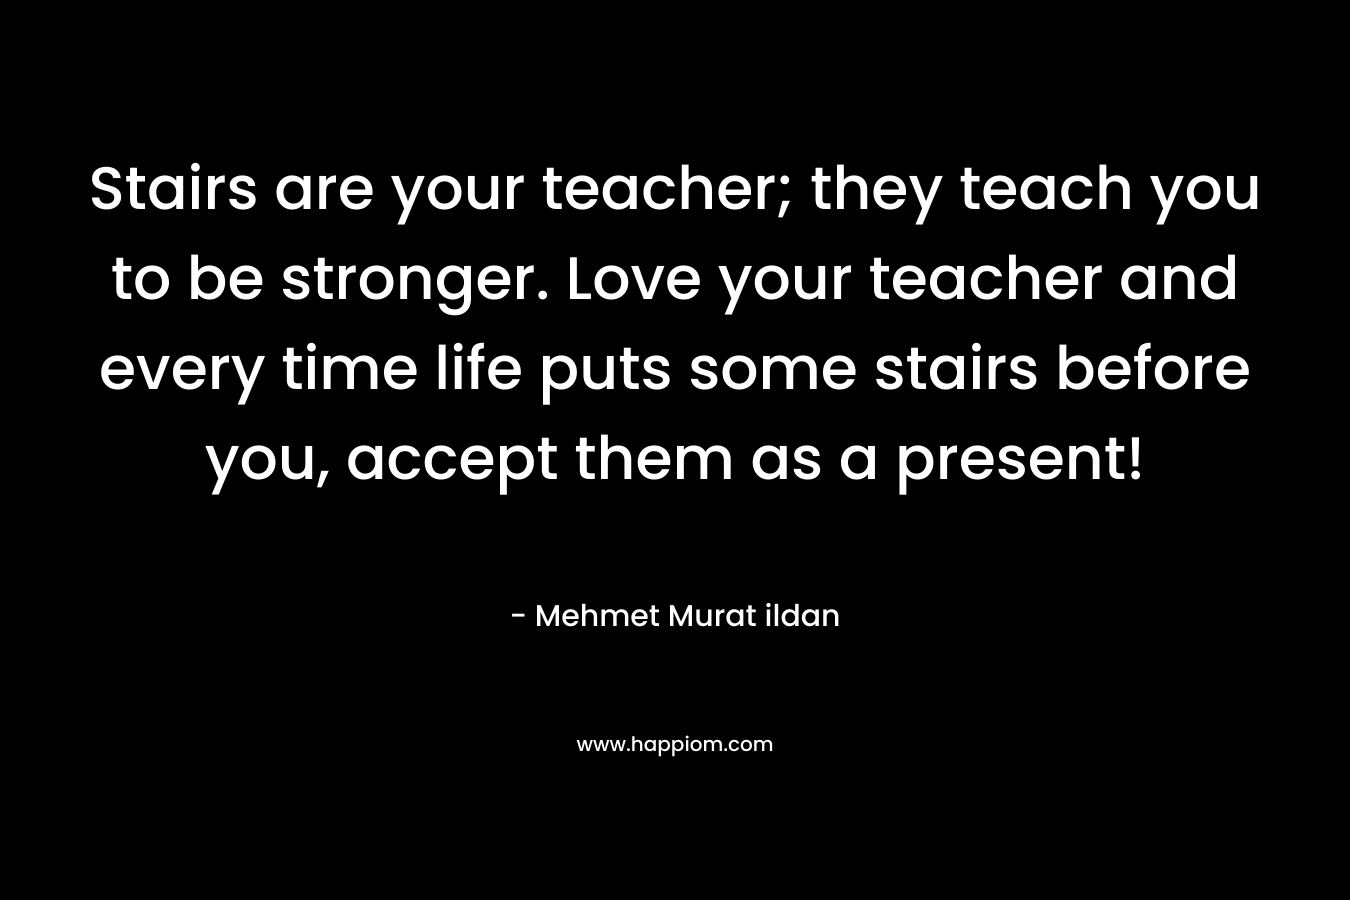 Stairs are your teacher; they teach you to be stronger. Love your teacher and every time life puts some stairs before you, accept them as a present!